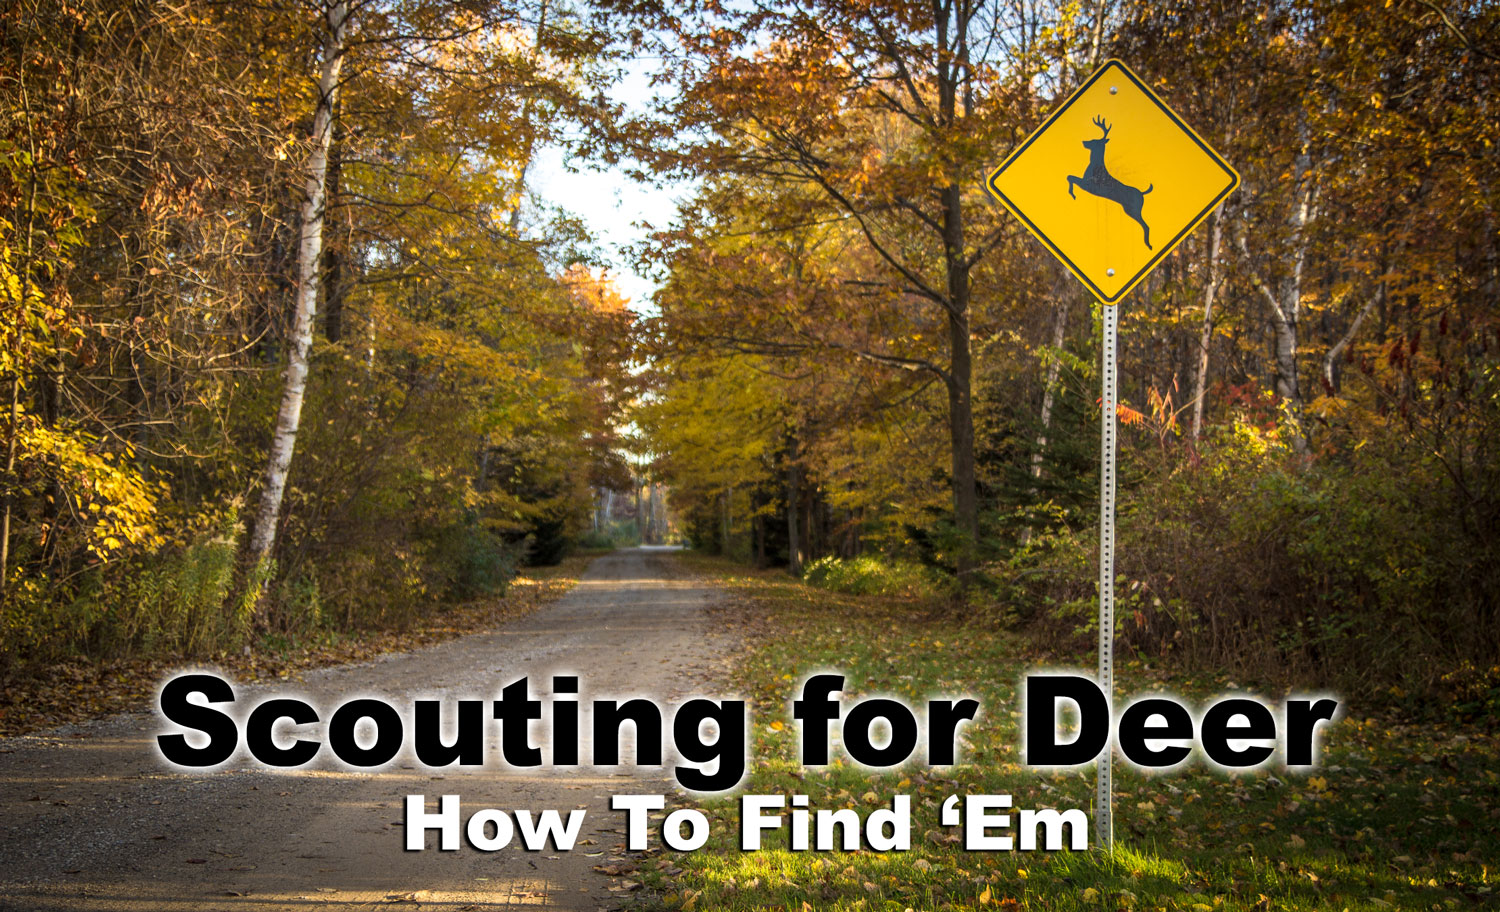 how to find deer in the woods